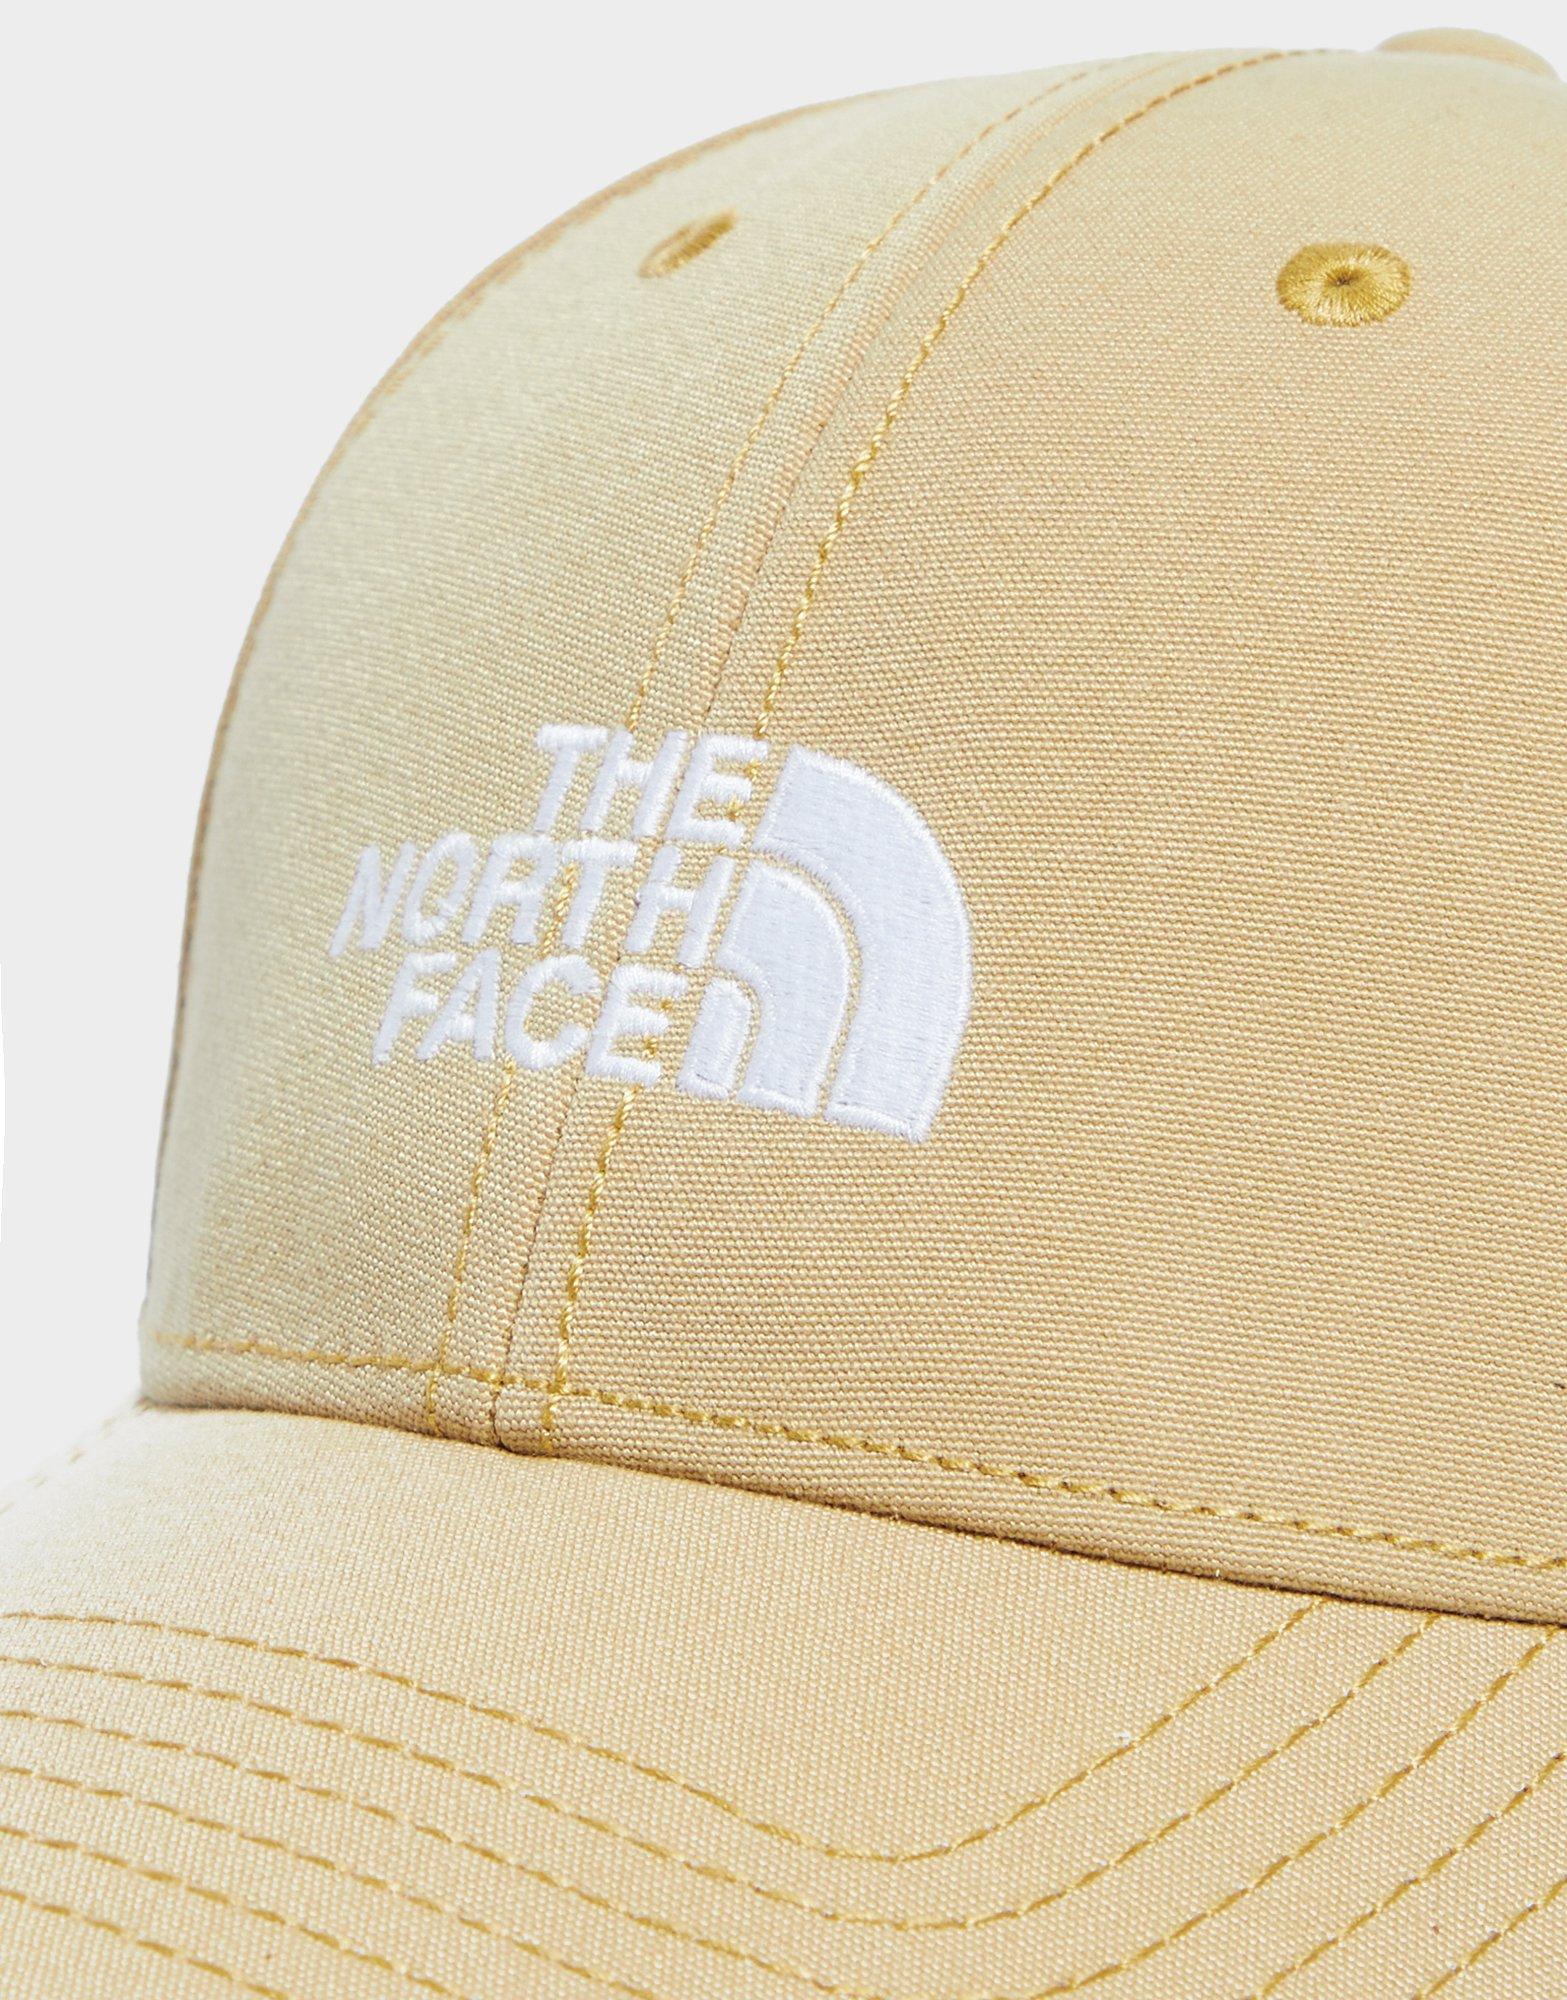 Casquette The North Face Homme